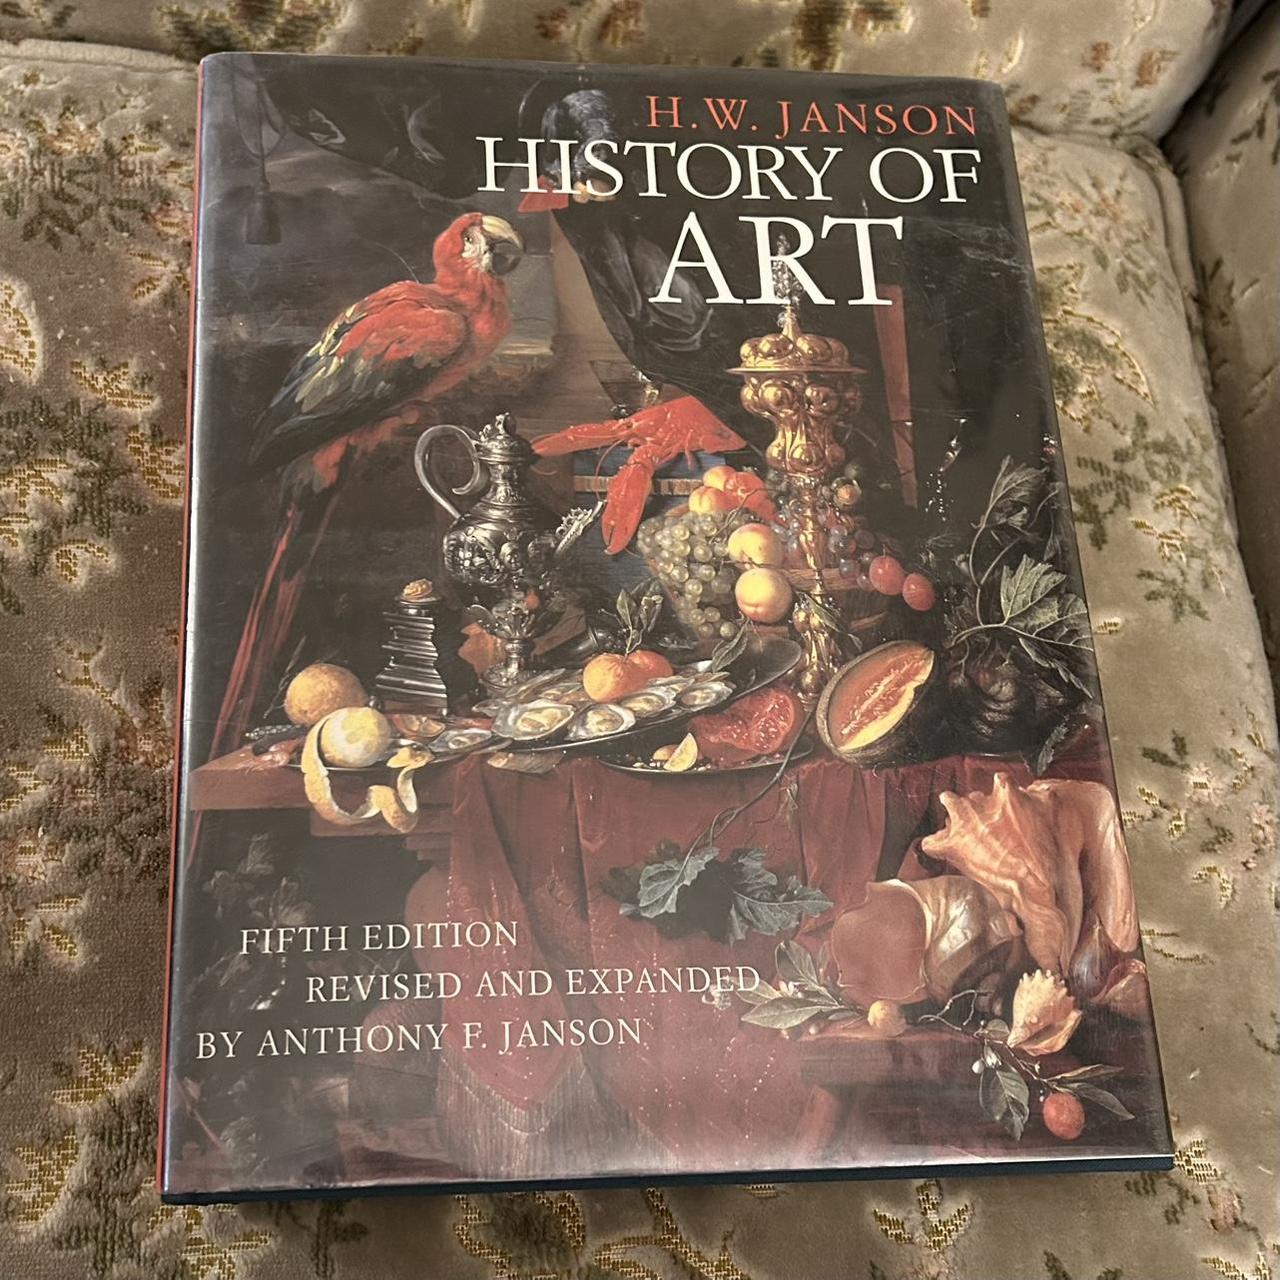 History of Art (5th edition expanded & revised)